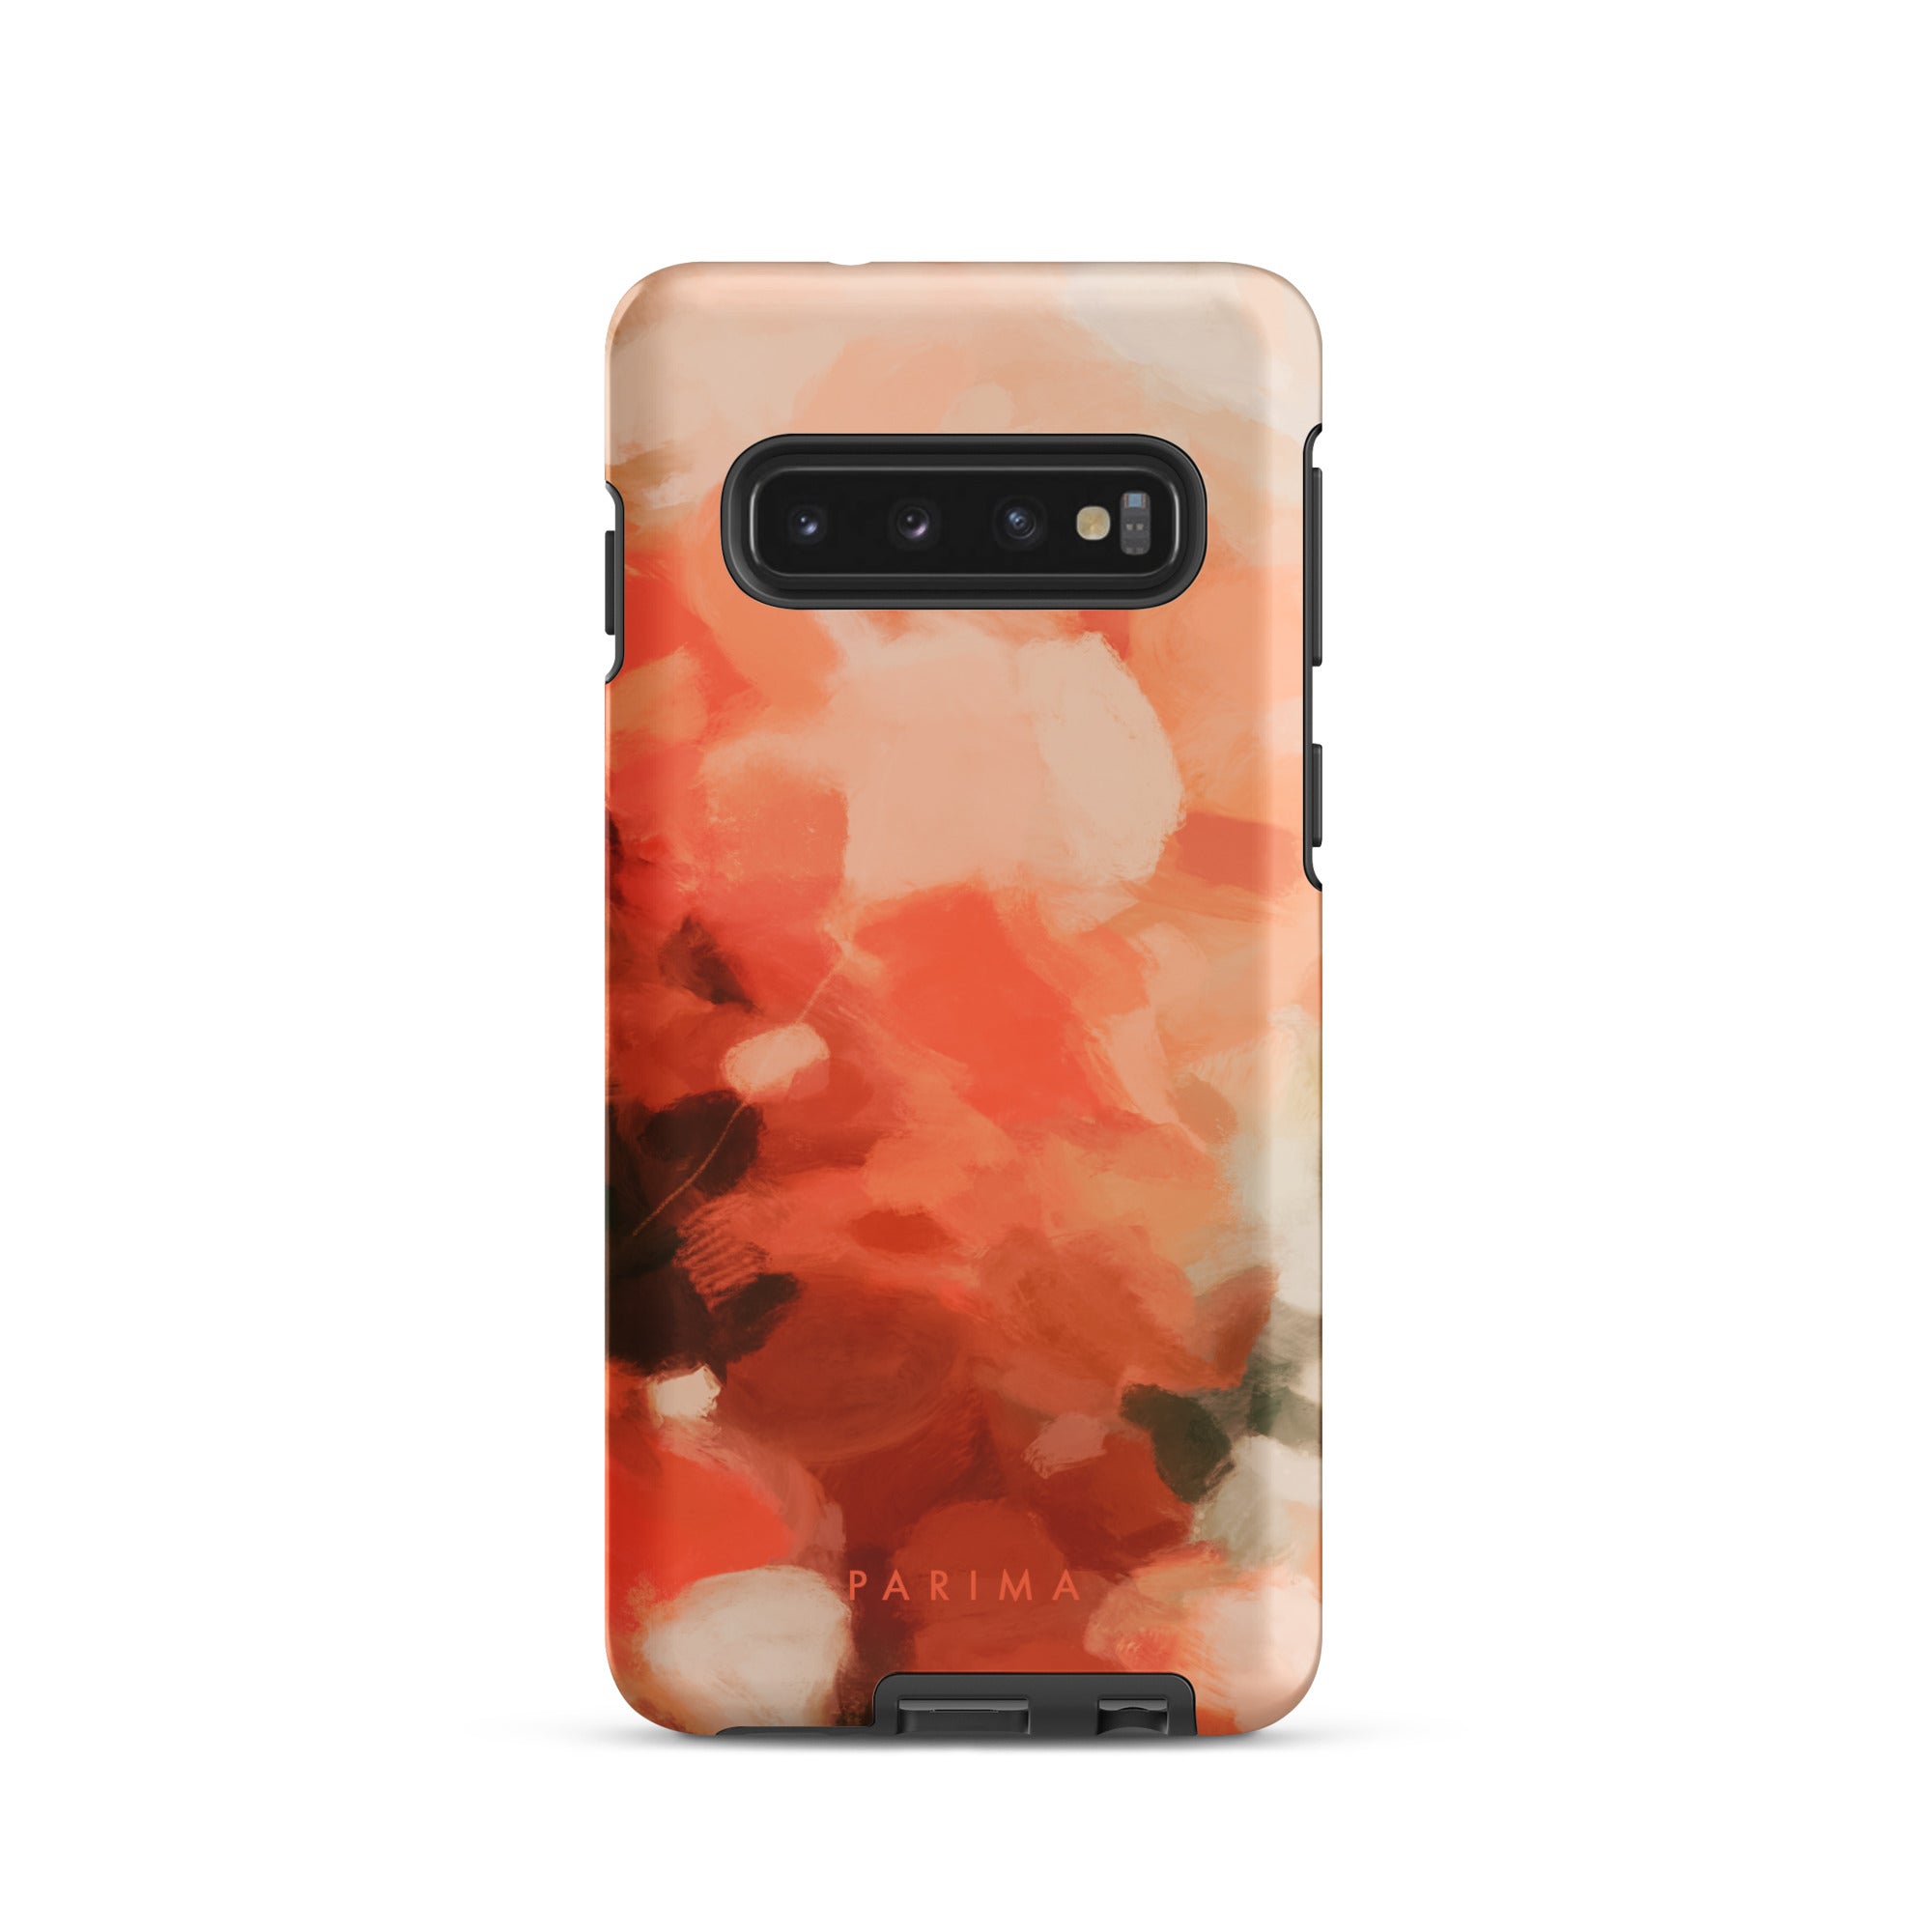 Sweet Nectar, orange and pink abstract art on Samsung Galaxy S10 tough case by Parima Studio